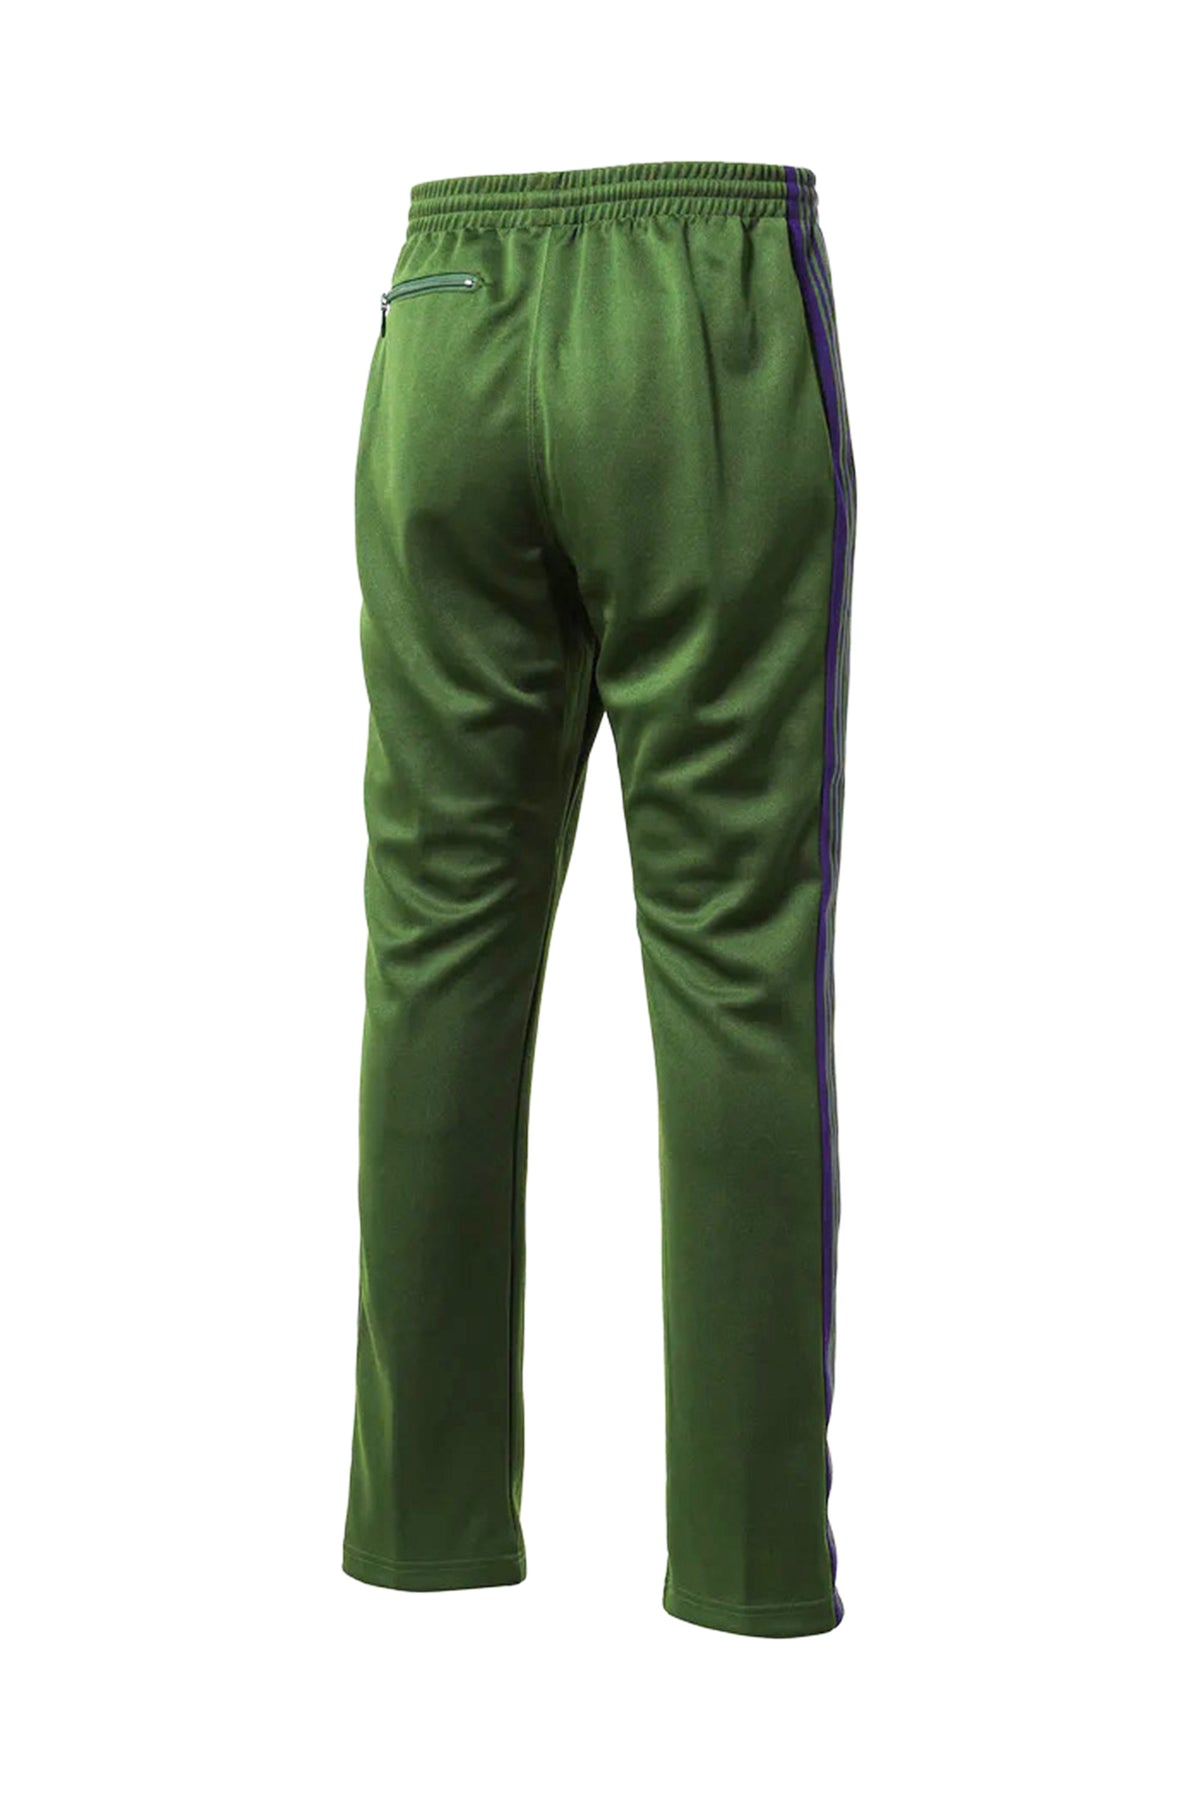 NARROW TRACK PANT - POLY SMOOTH / IVY GRN